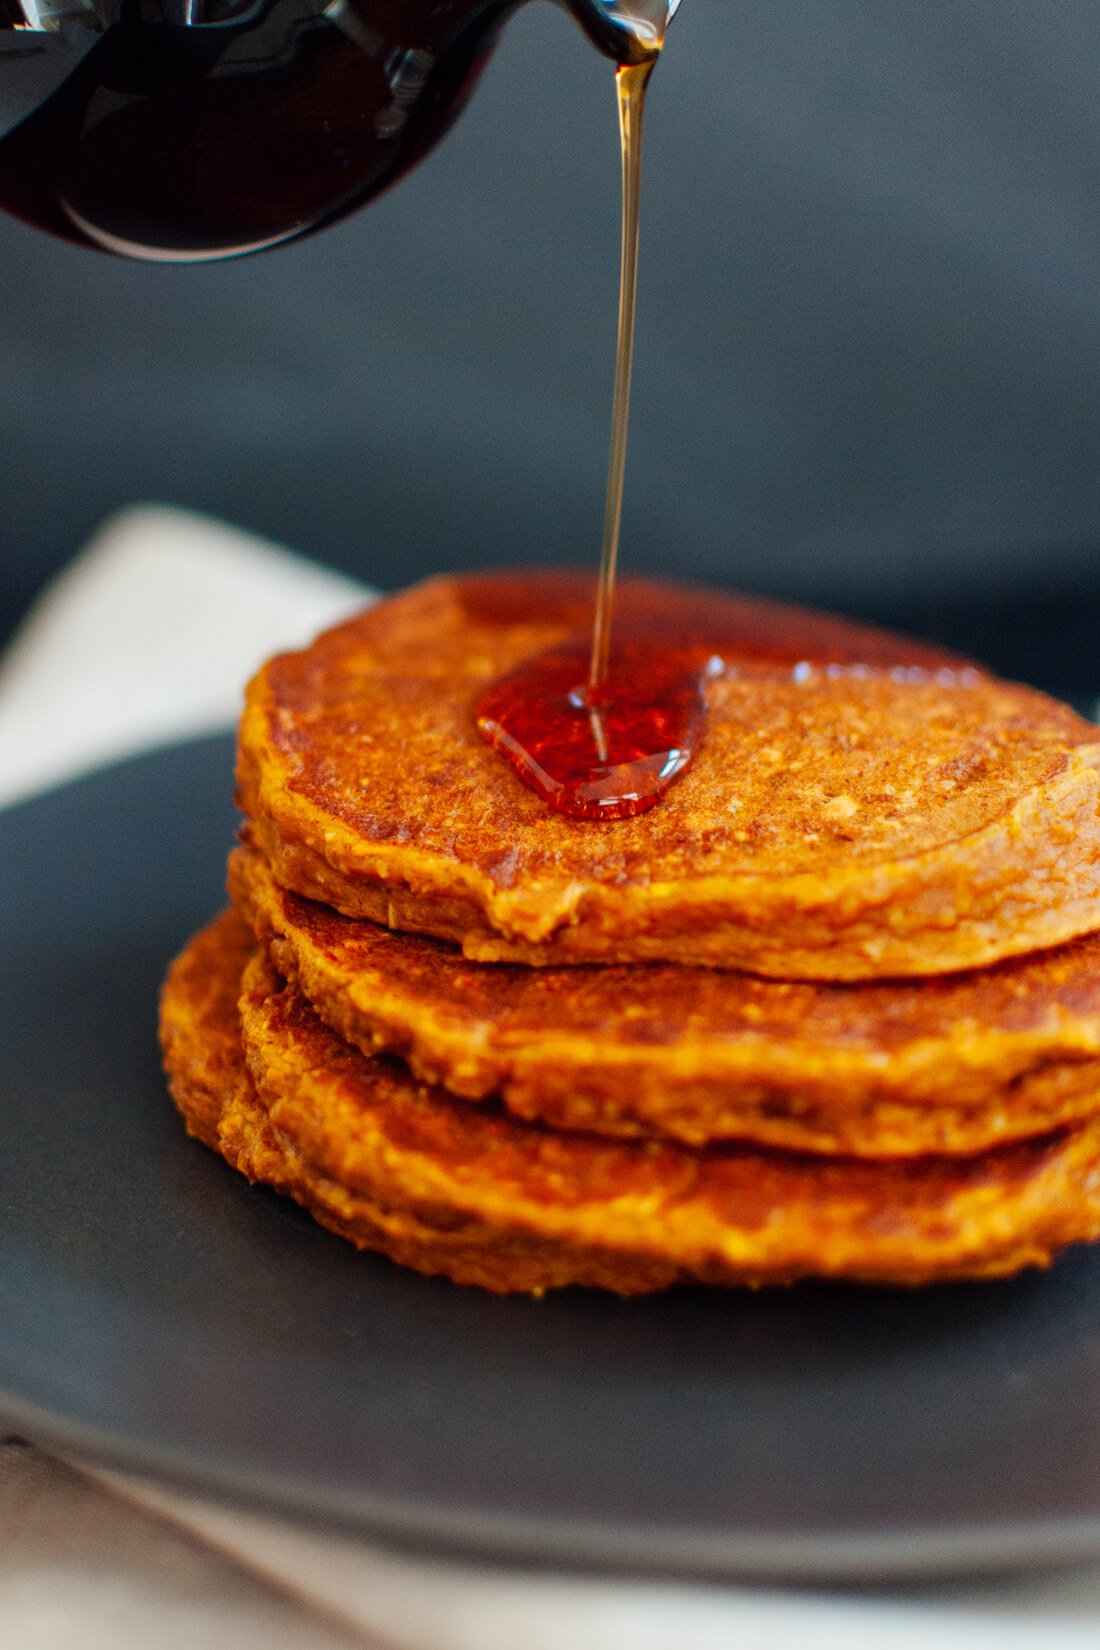 Delicious gluten-free pumpkin pancakes made with only one flour—oat flour!